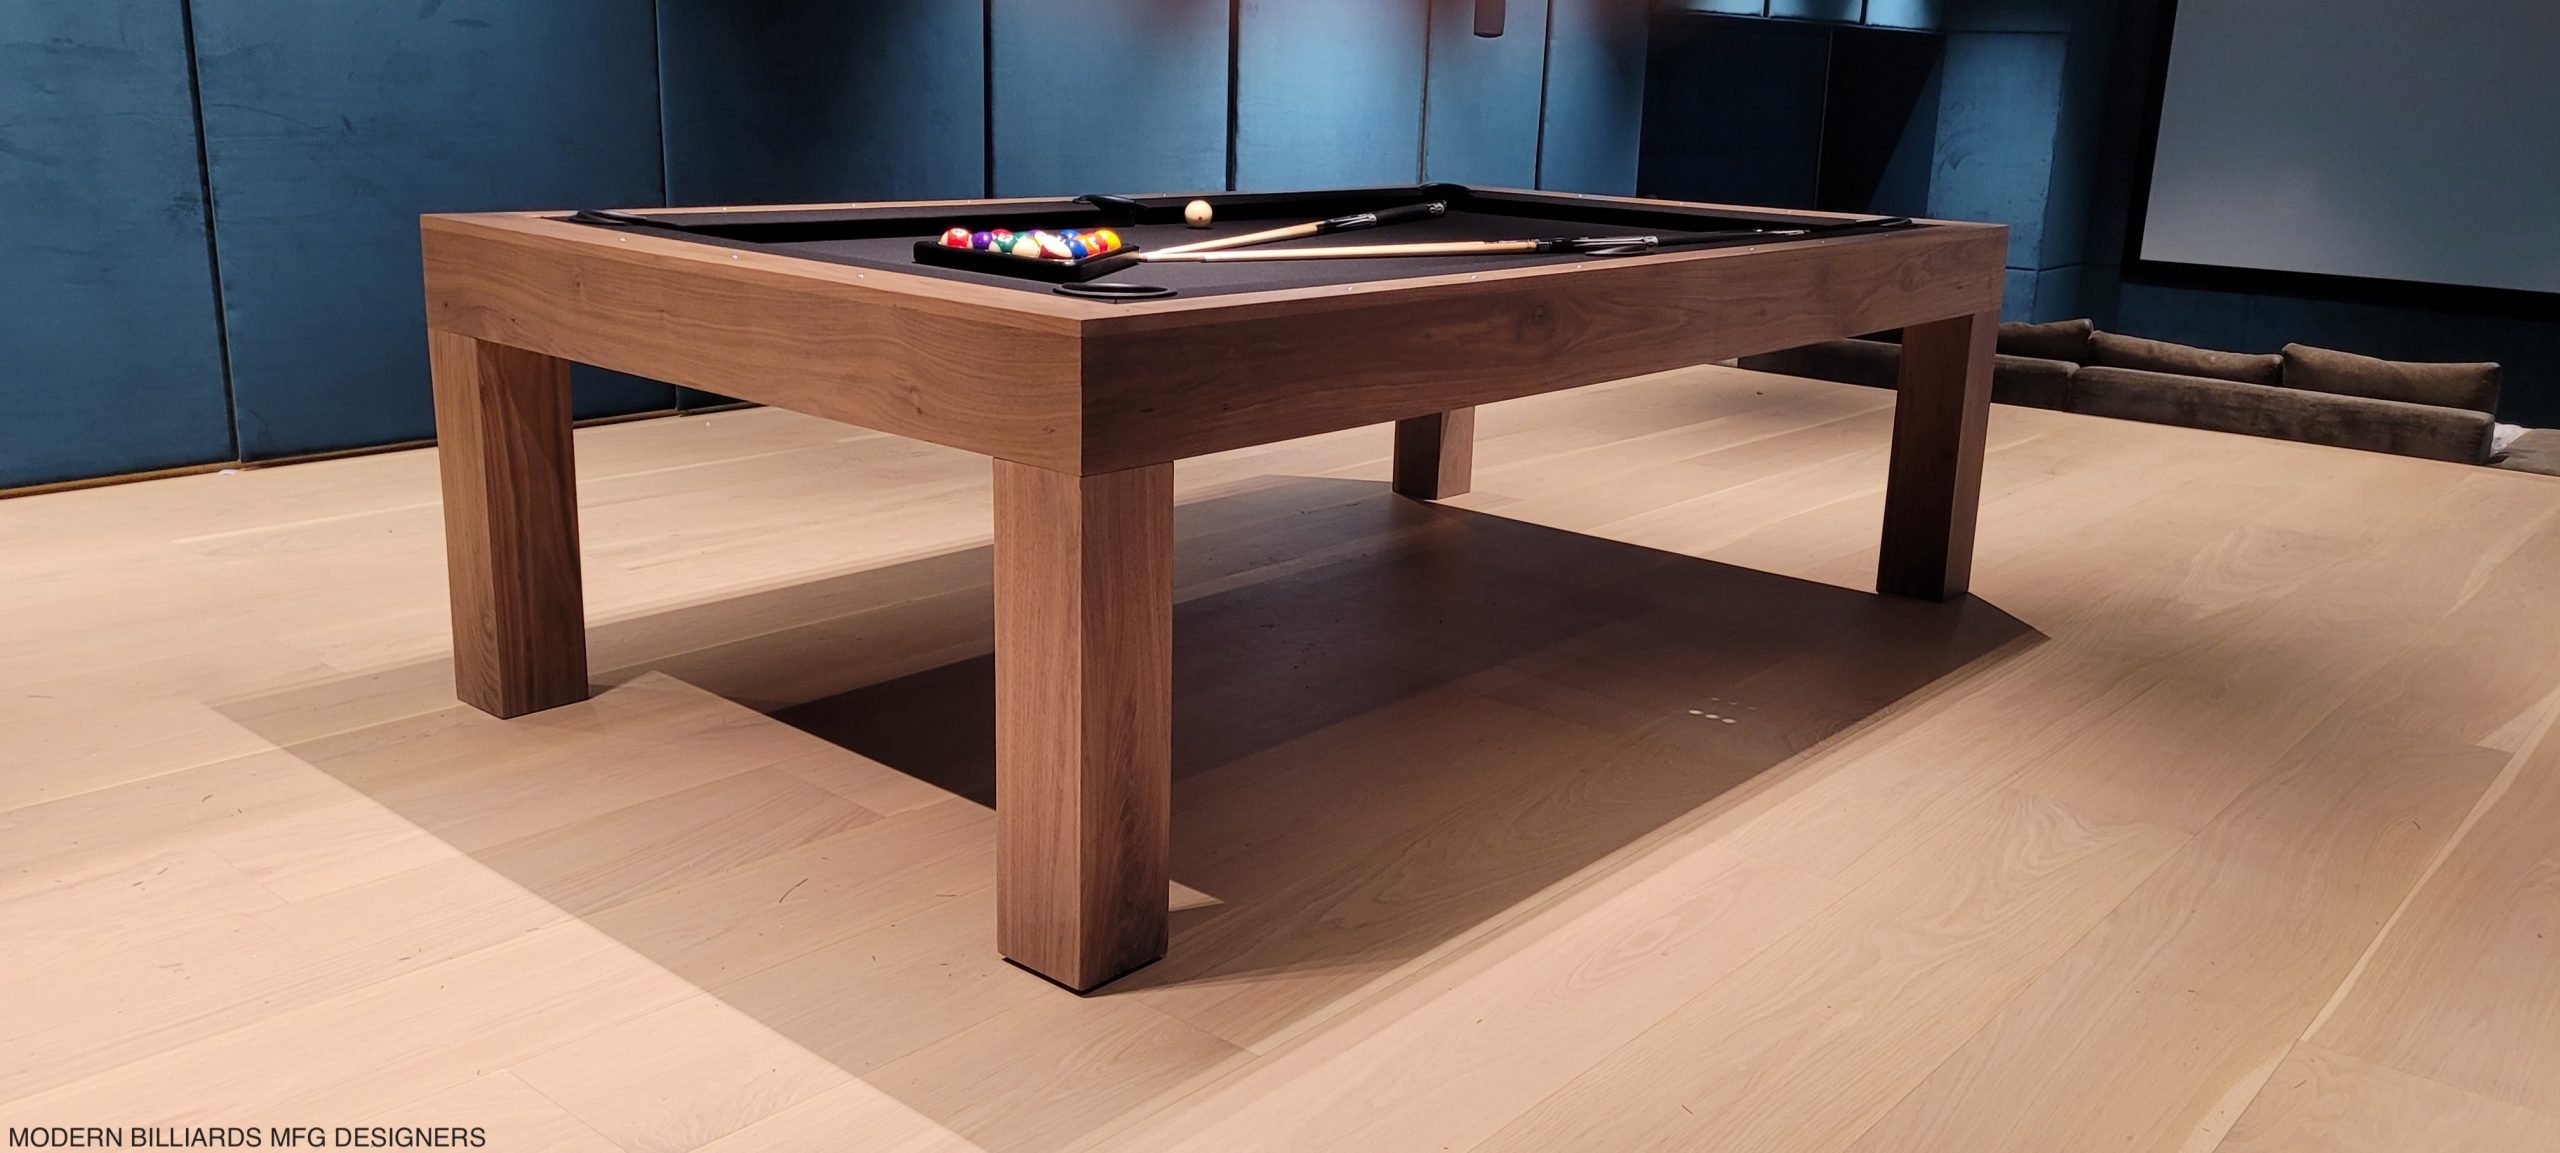 Pinnacle Walnut finish solid wood pool table offers Aristocratic style that  is sure to please